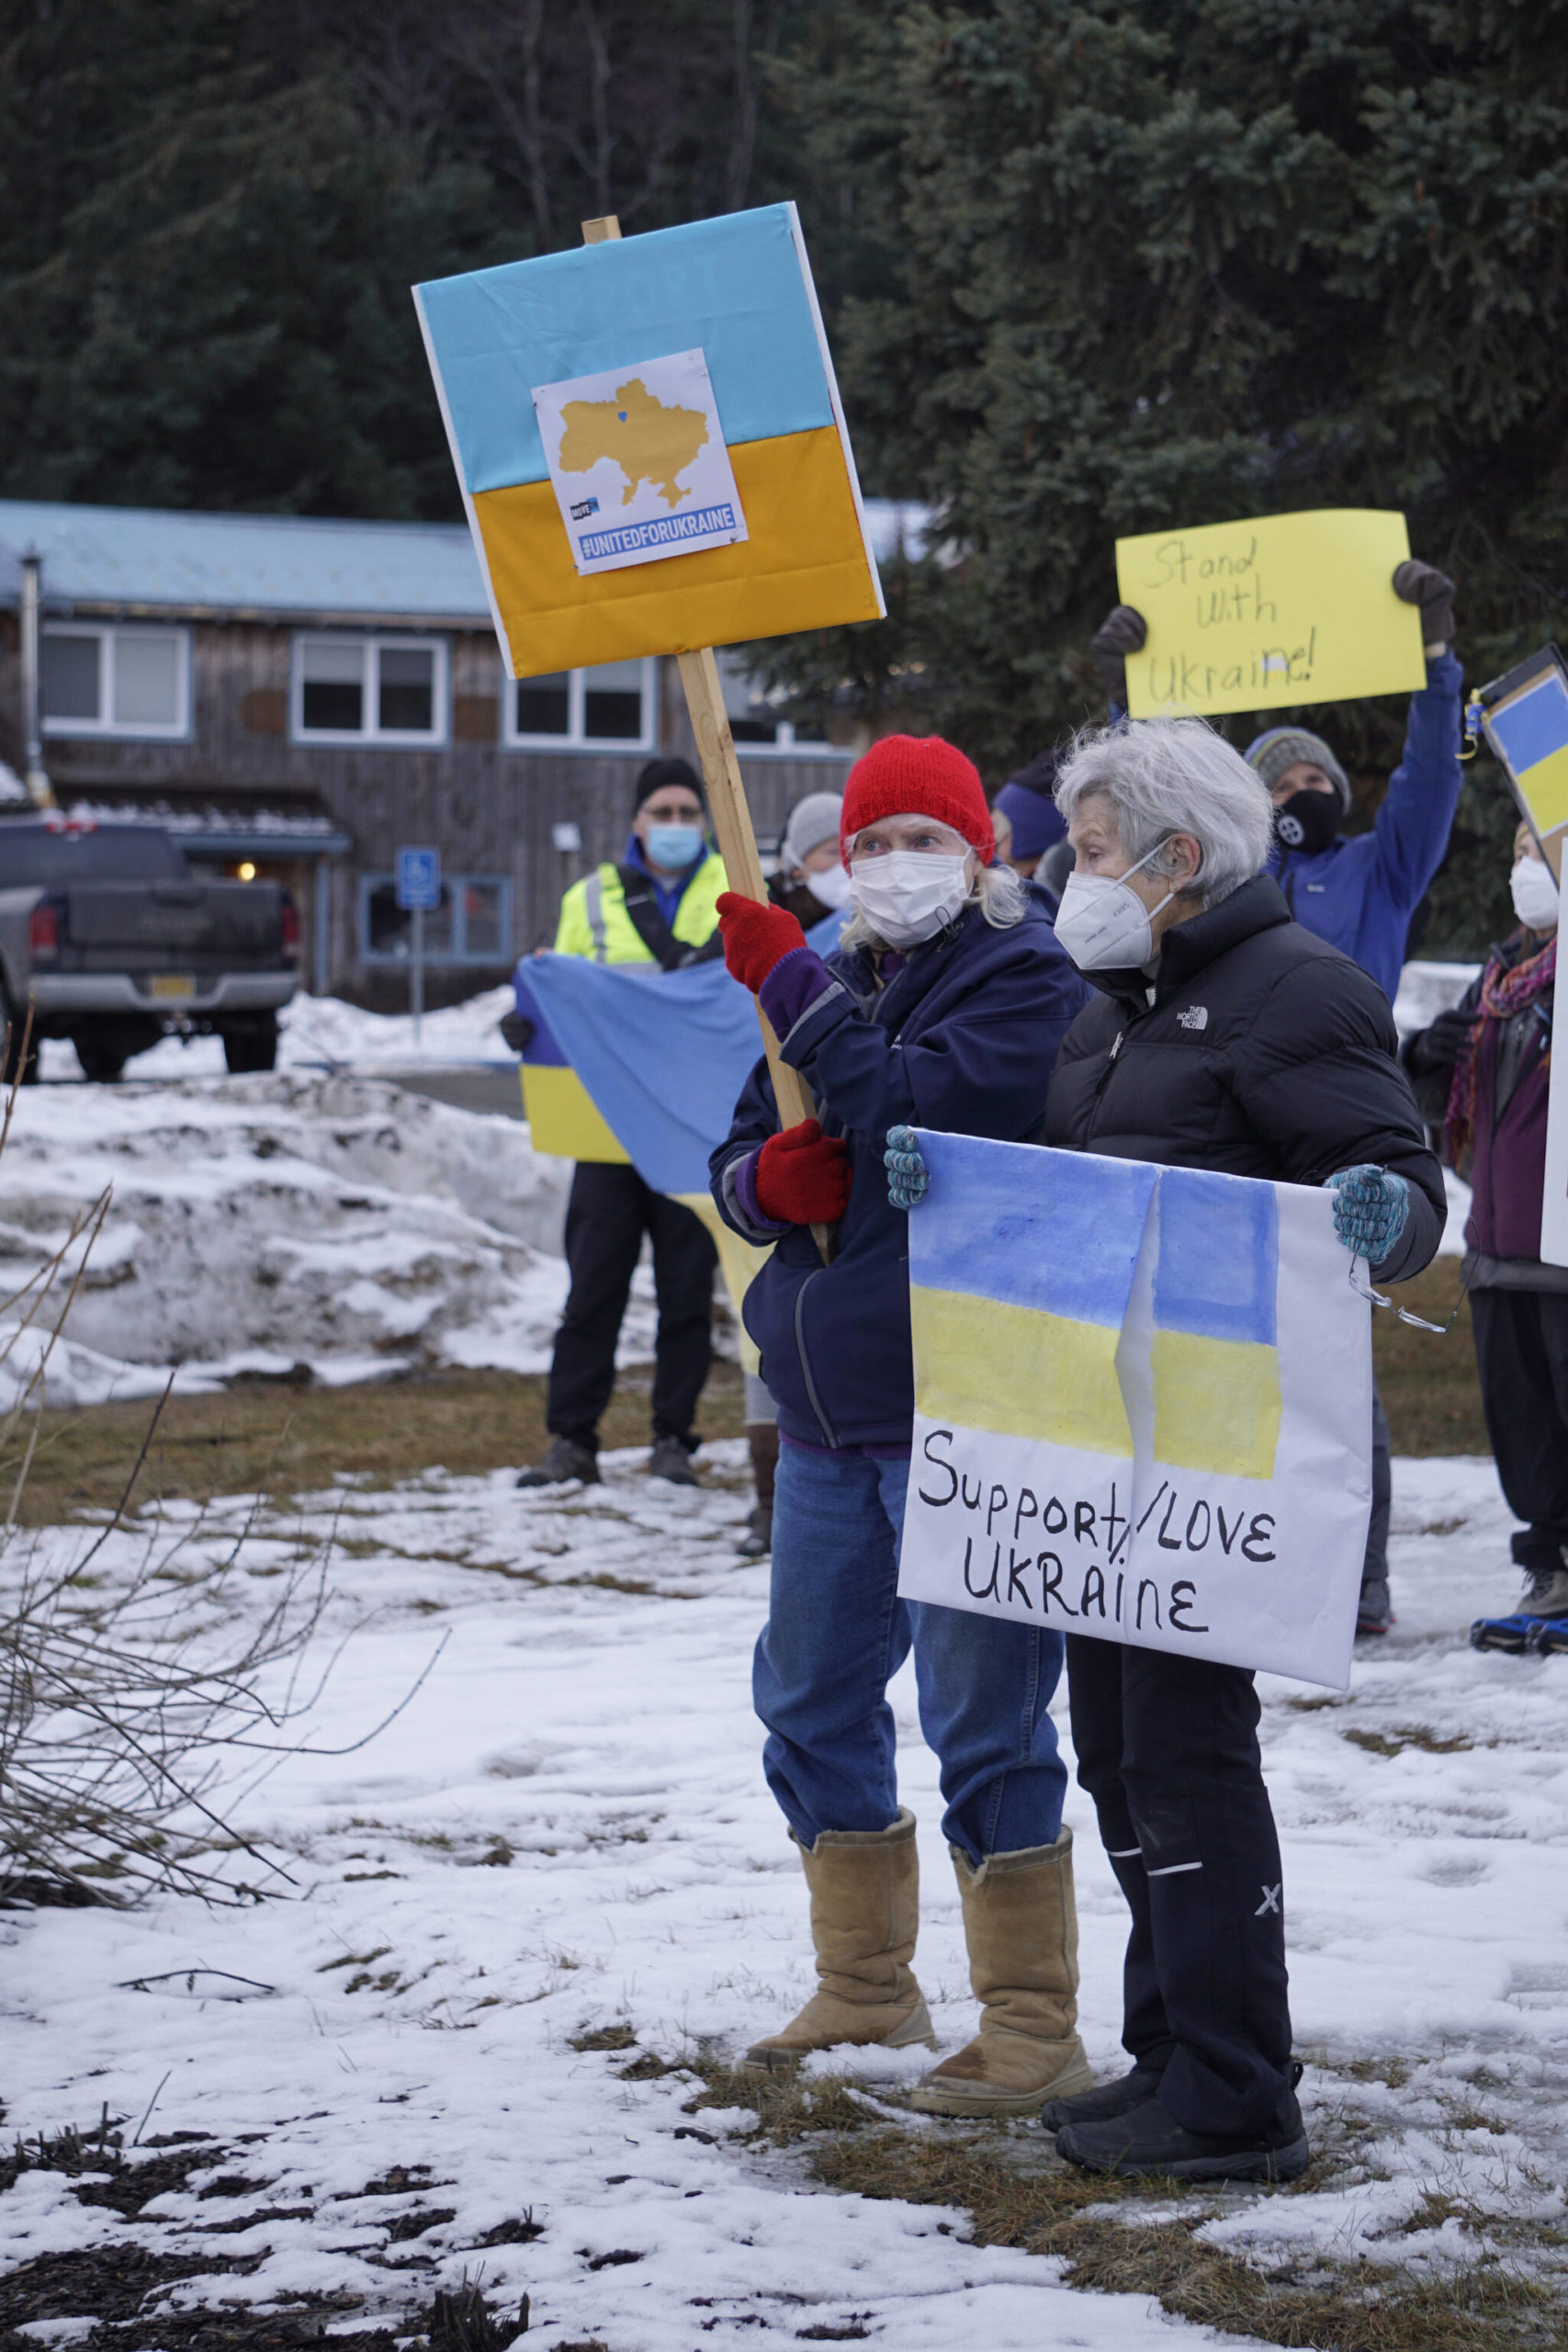 kate Finn, left, and Sandy Garraty, right, hold signs in a demonstration on Thursday, March 3, 2022, at WKFL Park in Homer, Alaska, in support of Ukraine and against the Russian invasion. (Photo by Michael Armstrong/Homer News)